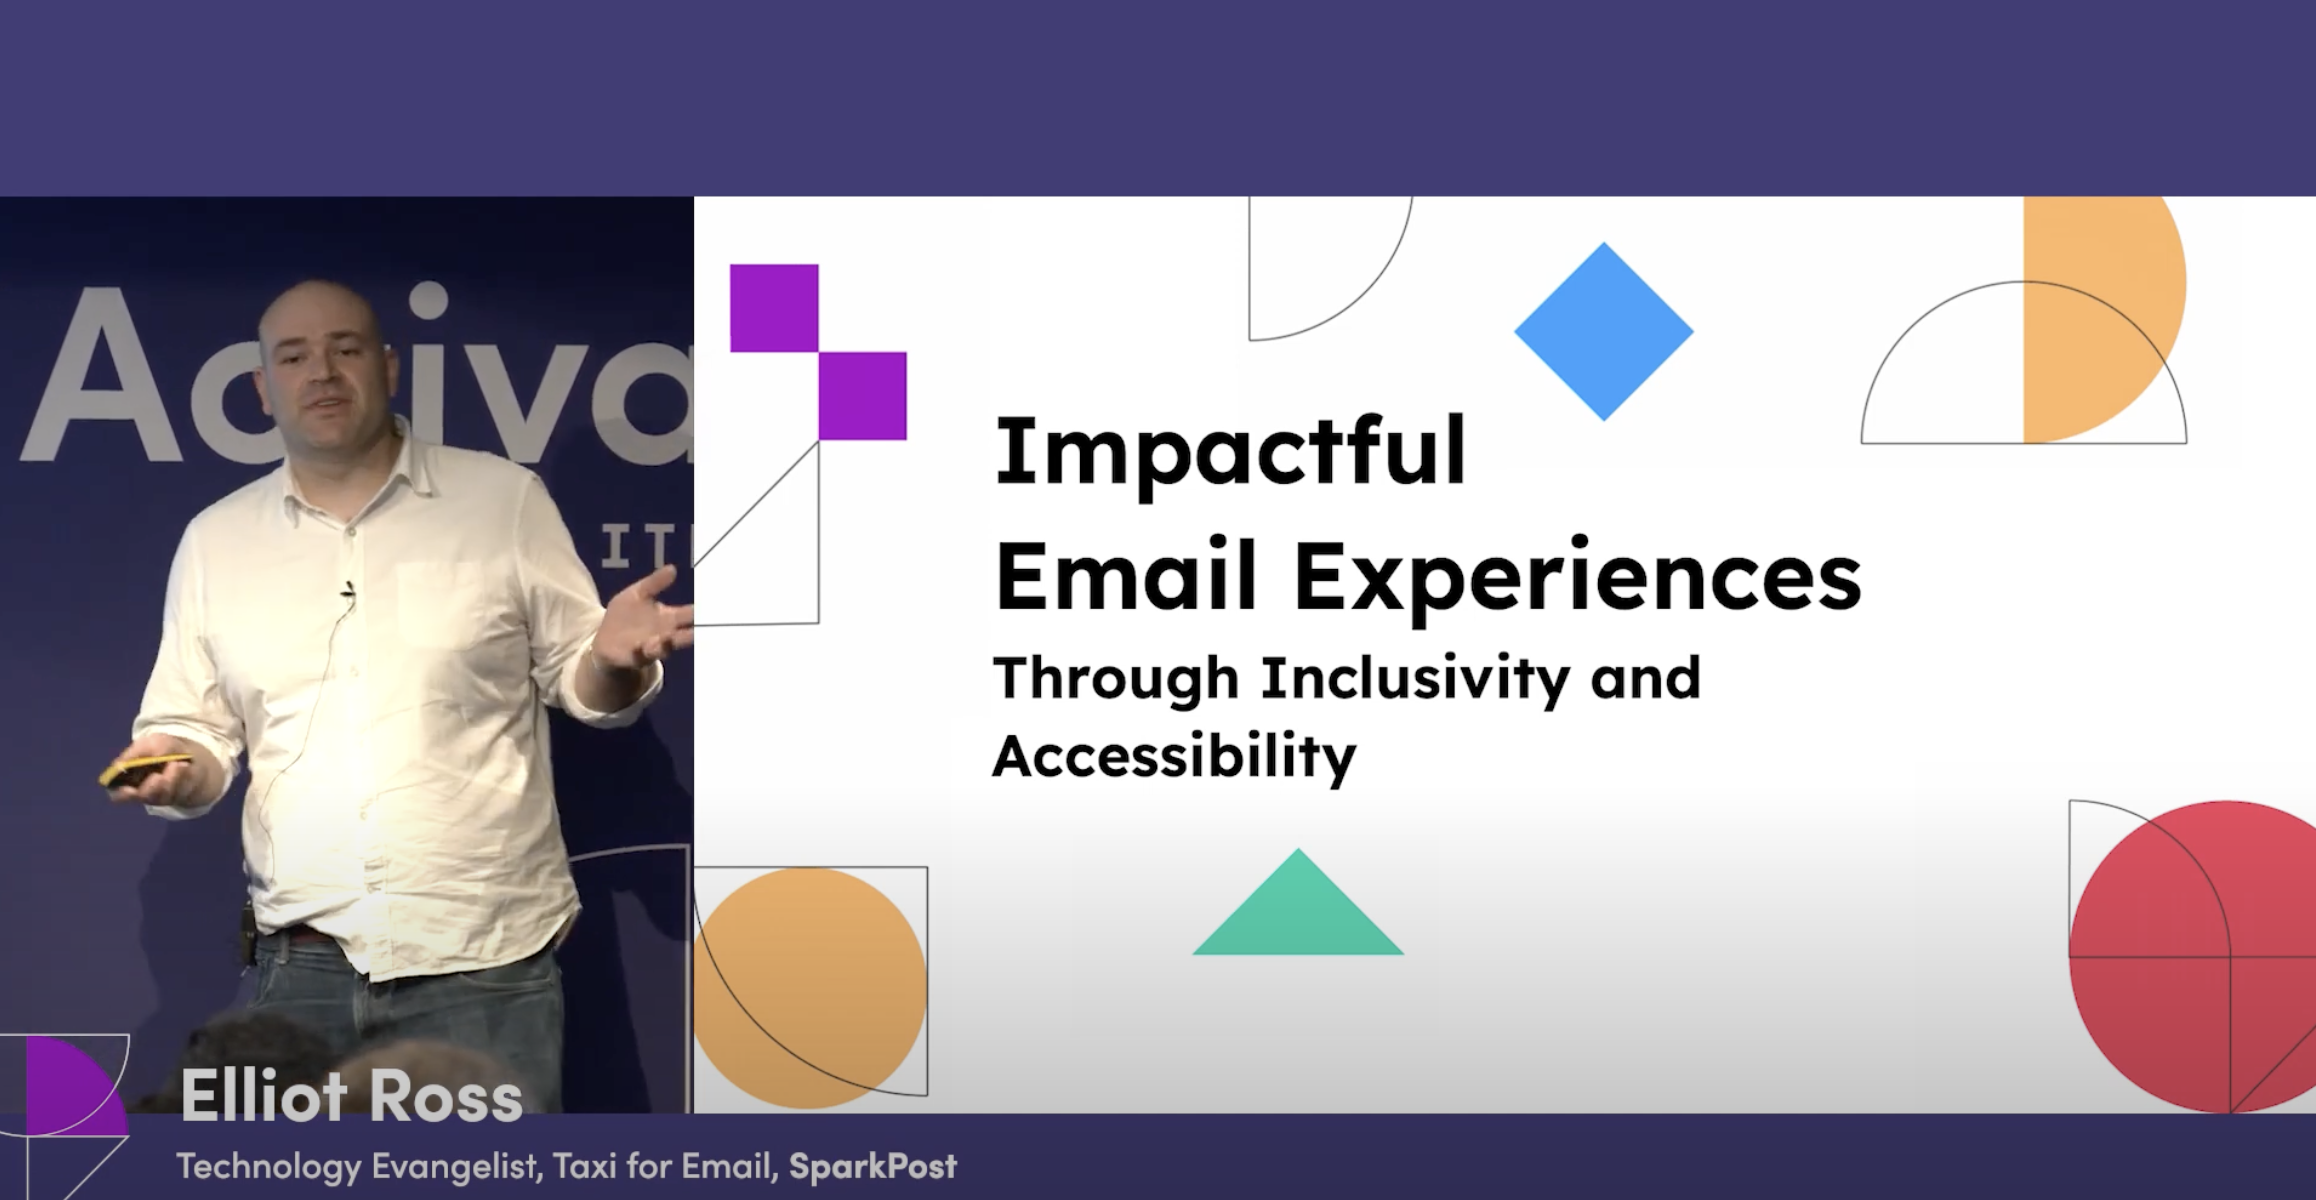 Impactful Email Experiences Through Inclusivity and Accessibility